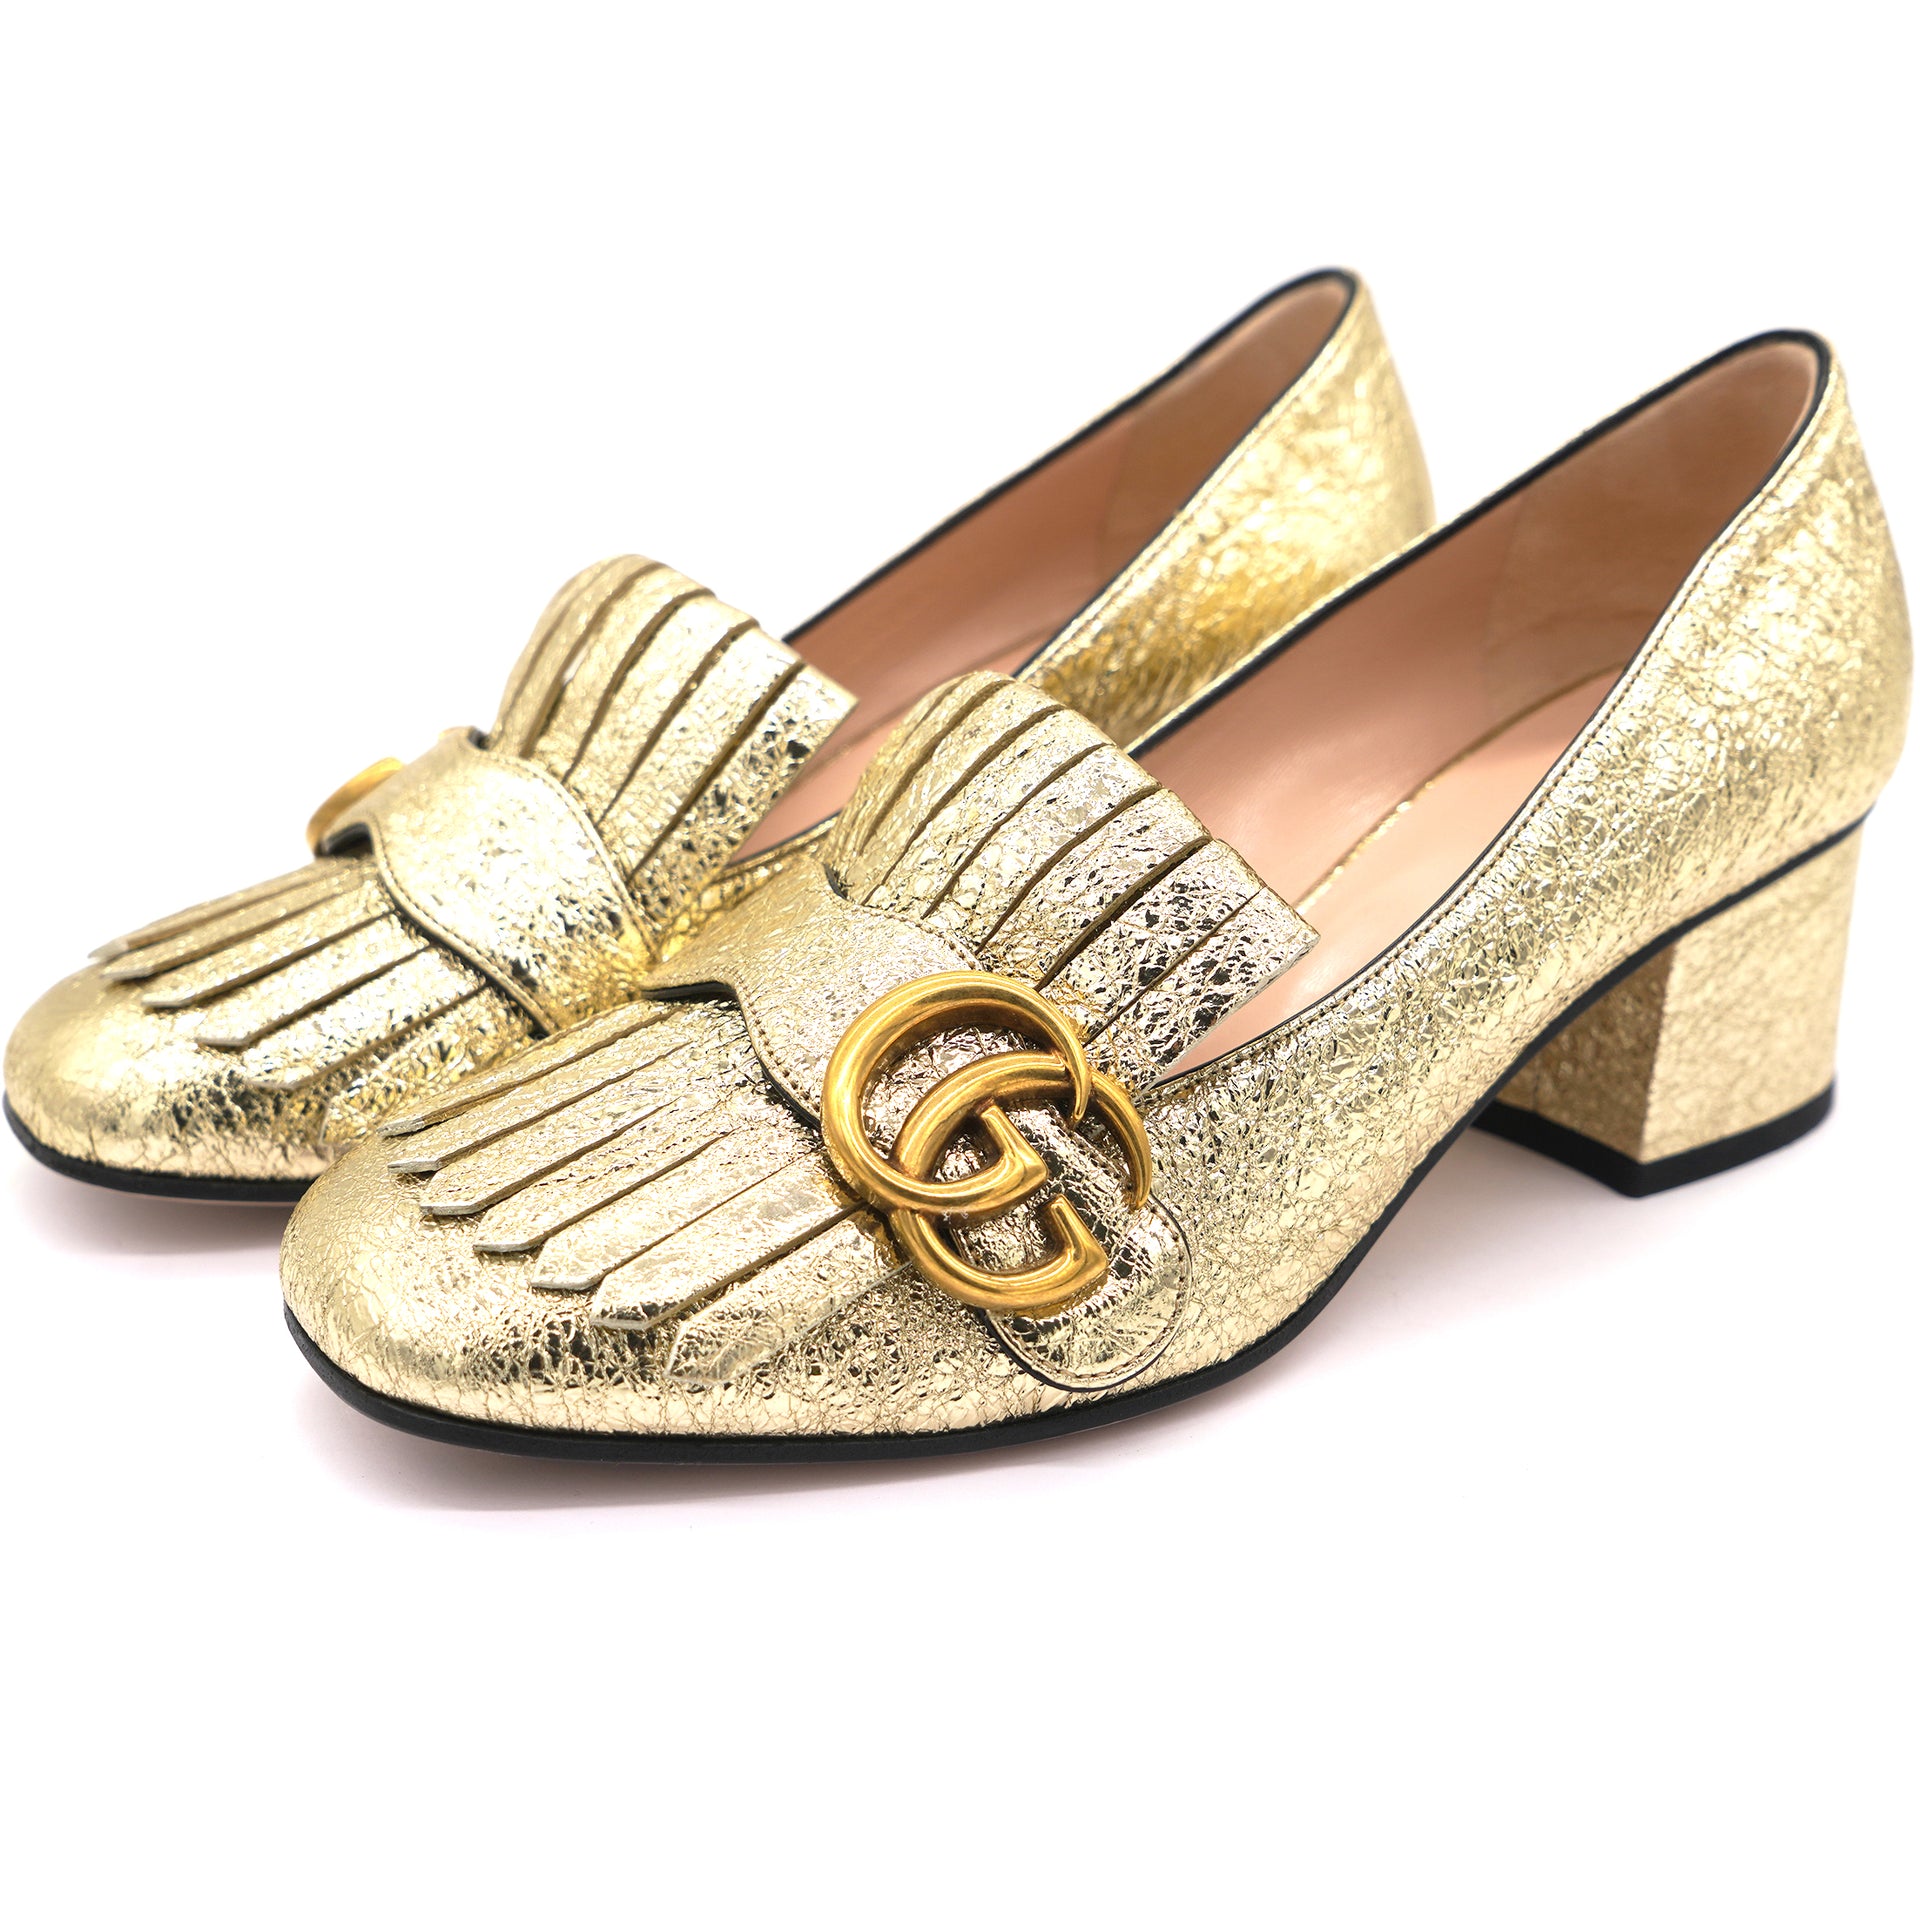 GUCCI Marmont Fringe Double GG Crackle Gold Loafers Heels sz 36.5